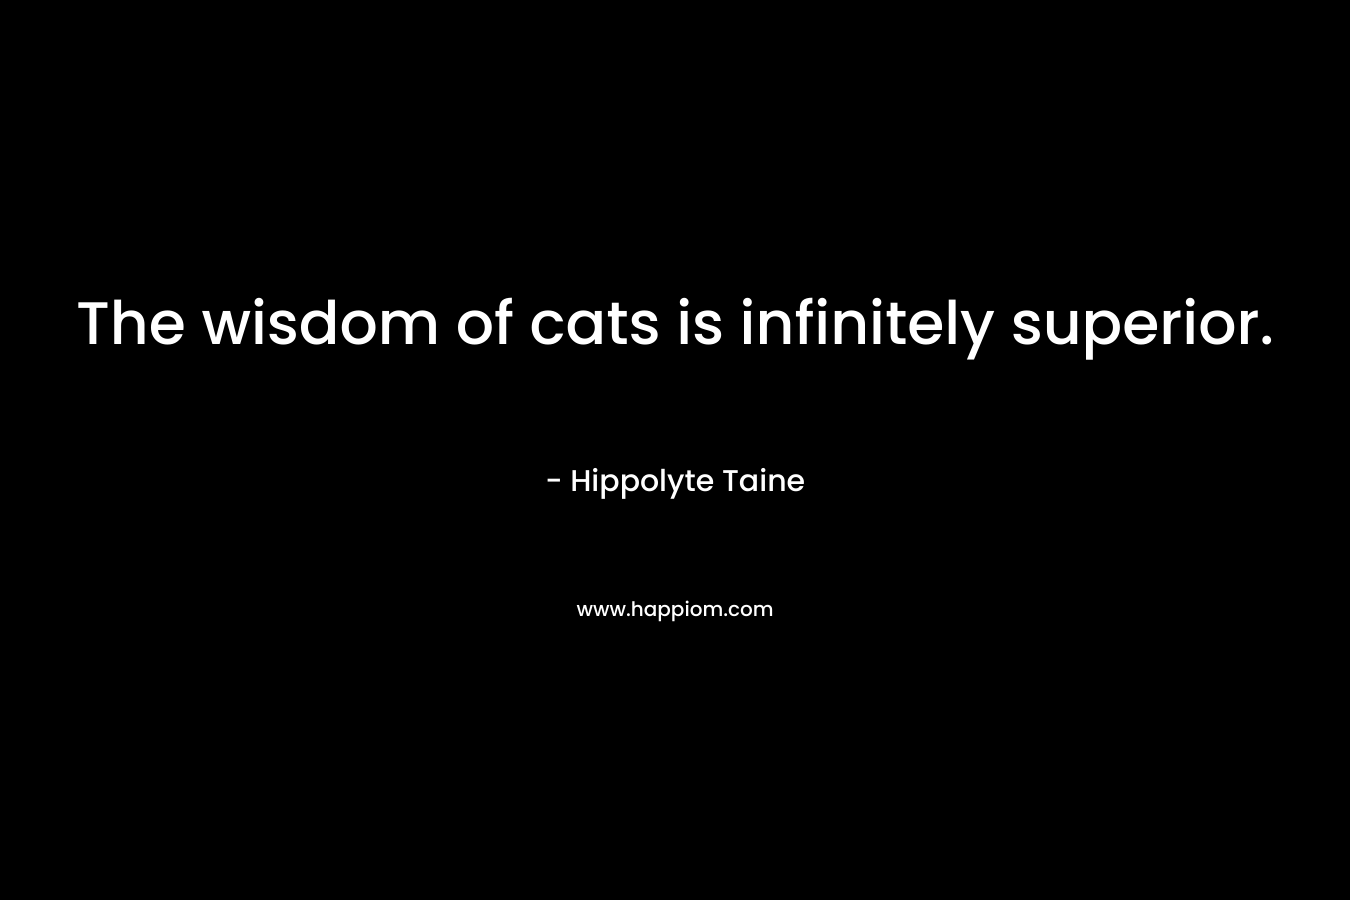 The wisdom of cats is infinitely superior. – Hippolyte Taine